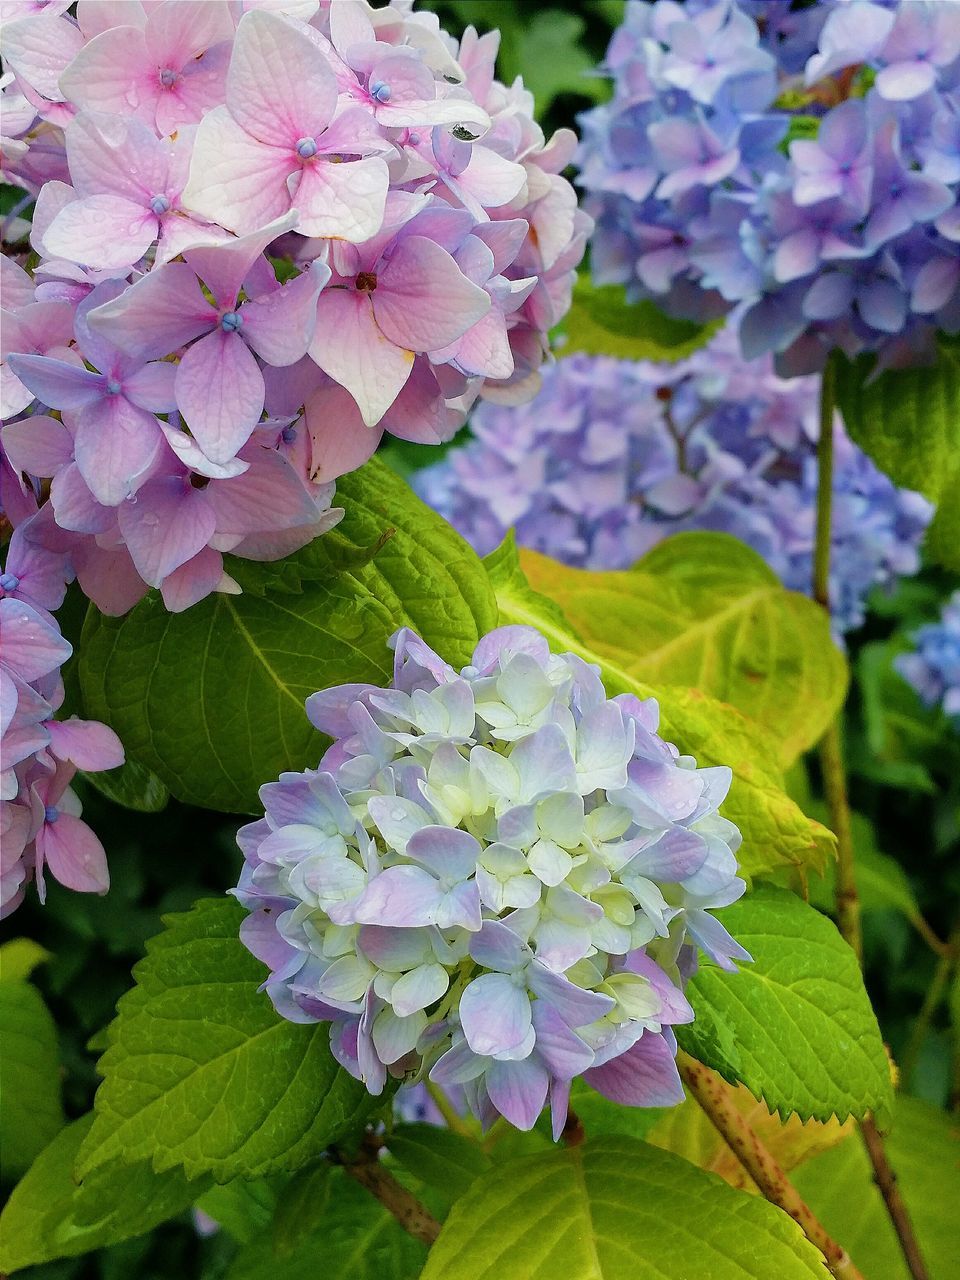 flower, freshness, fragility, growth, petal, beauty in nature, flower head, leaf, nature, blooming, purple, blossom, hydrangea, in bloom, close-up, plant, park - man made space, botany, springtime, high angle view